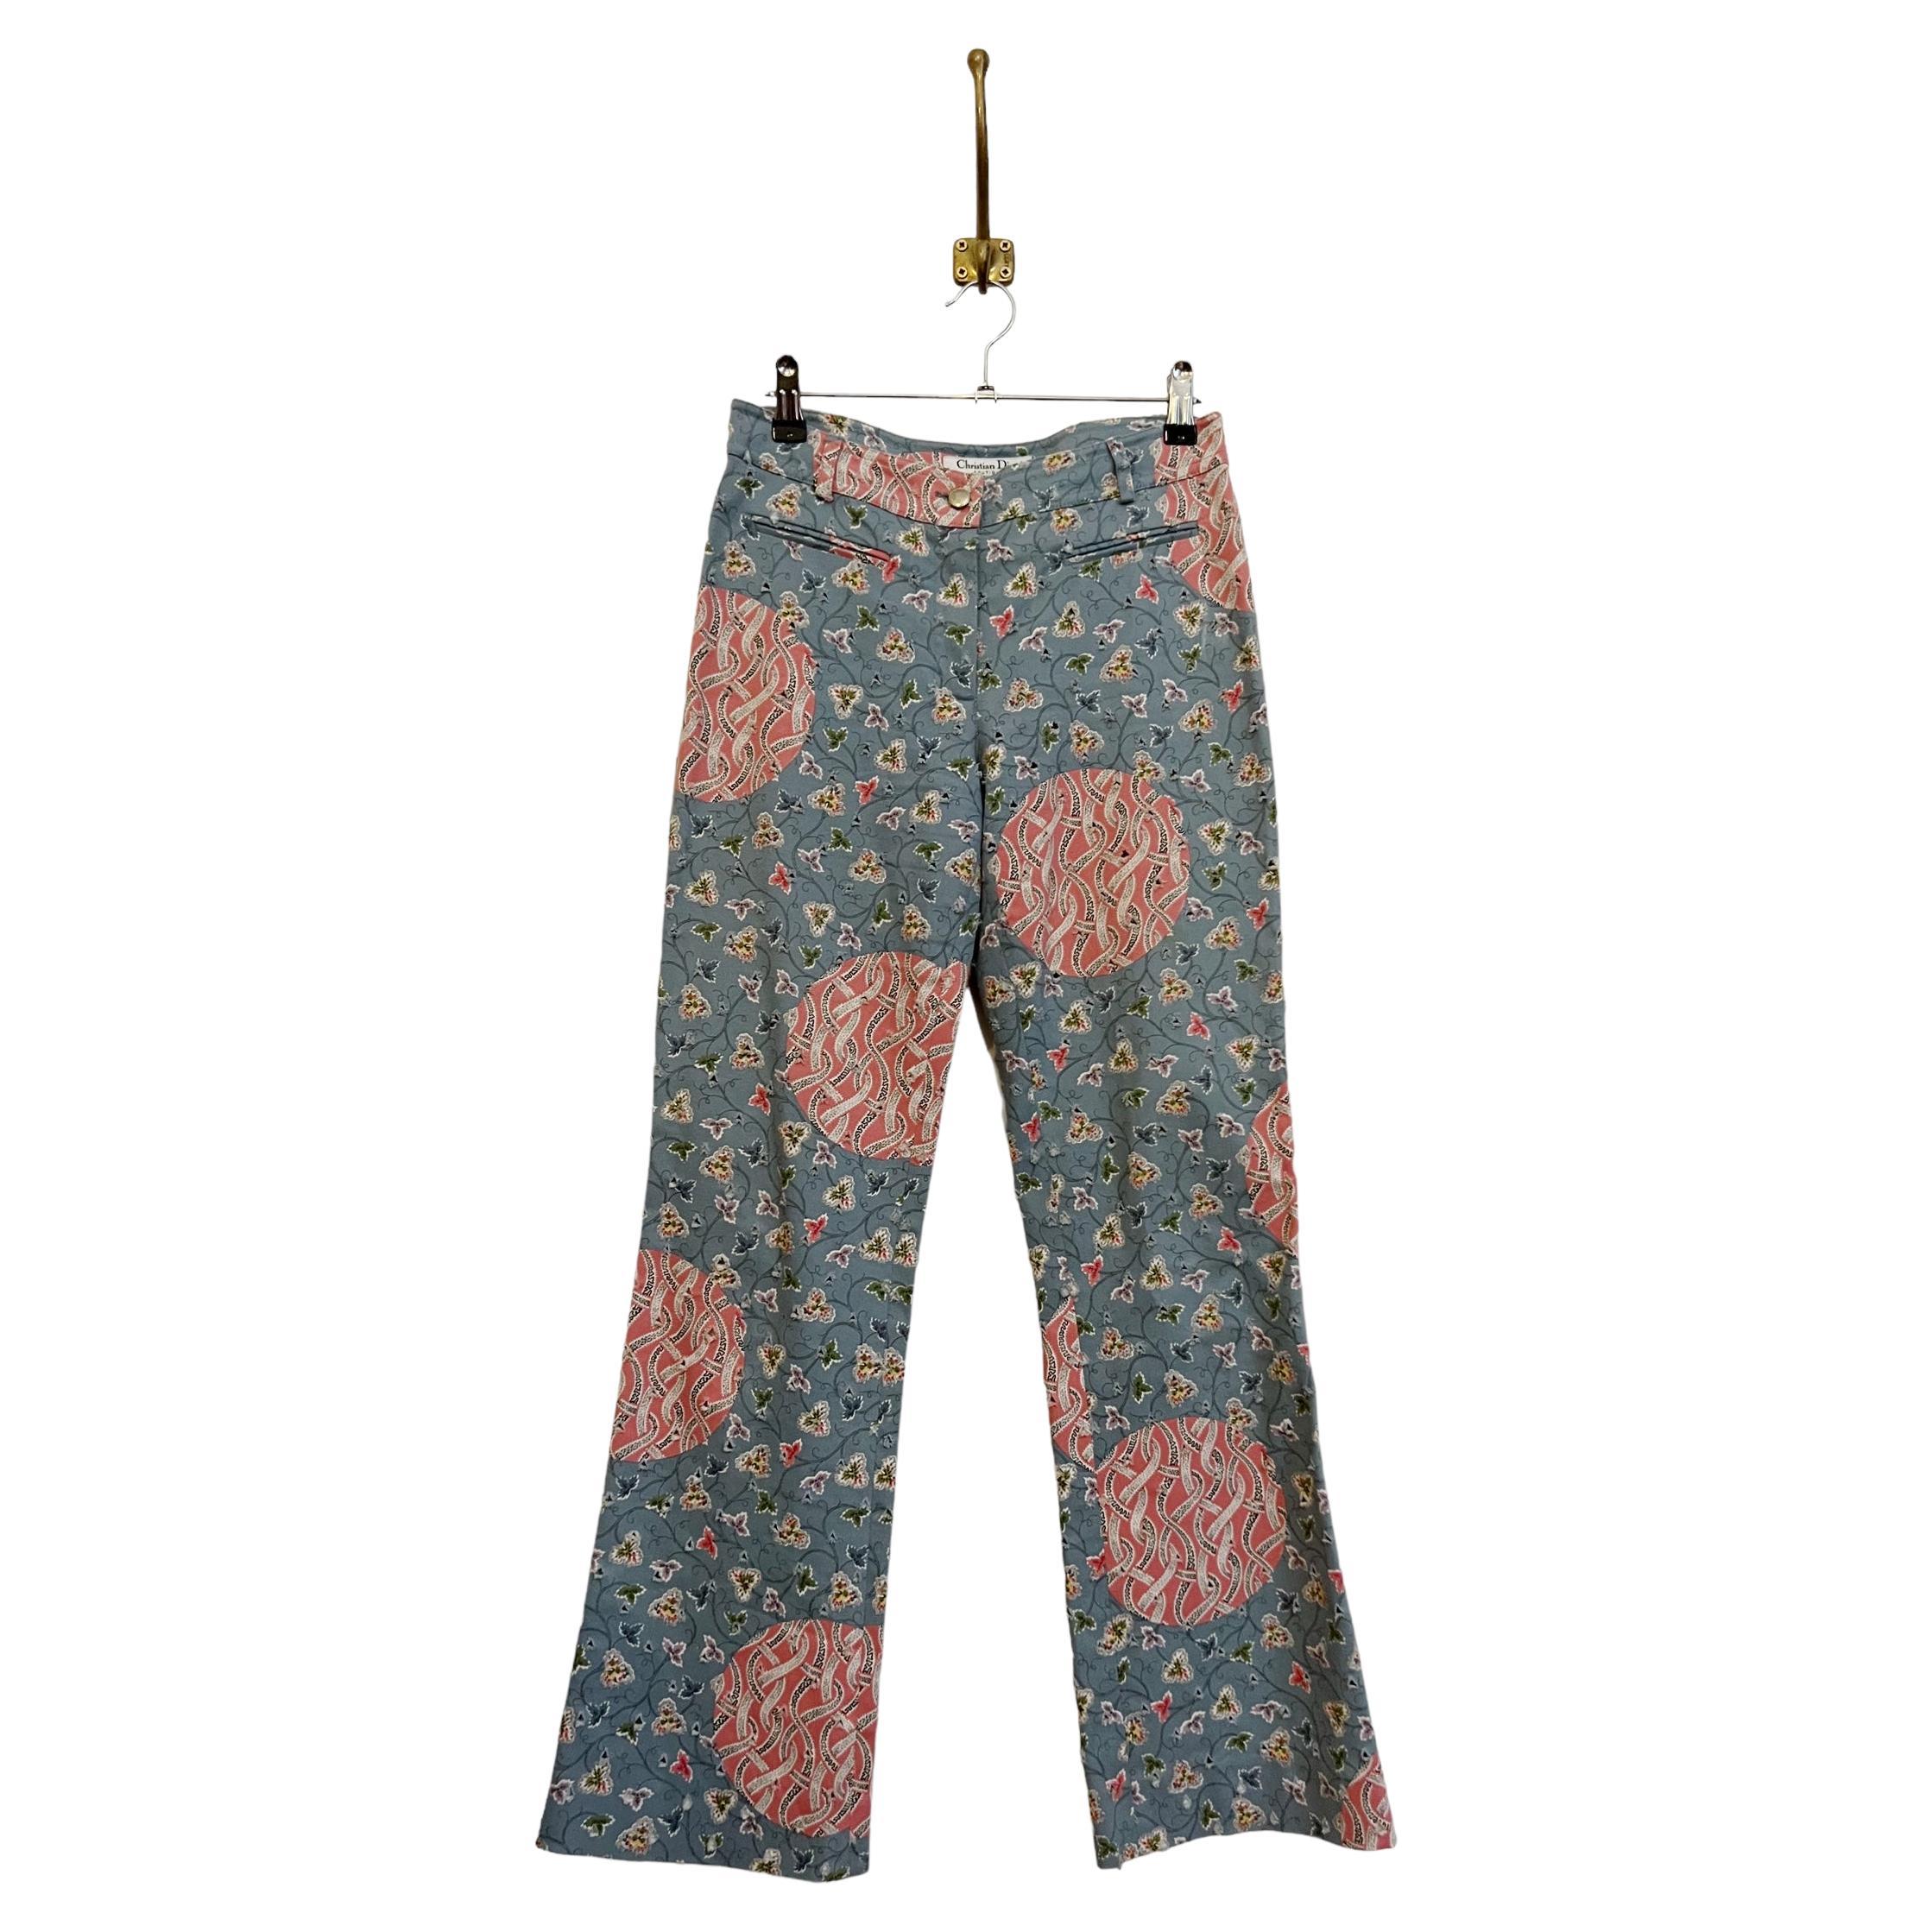 Vintage Y2k Low Rise Christian Dior by Galliano Floral Blossom pattern Jeans For Sale